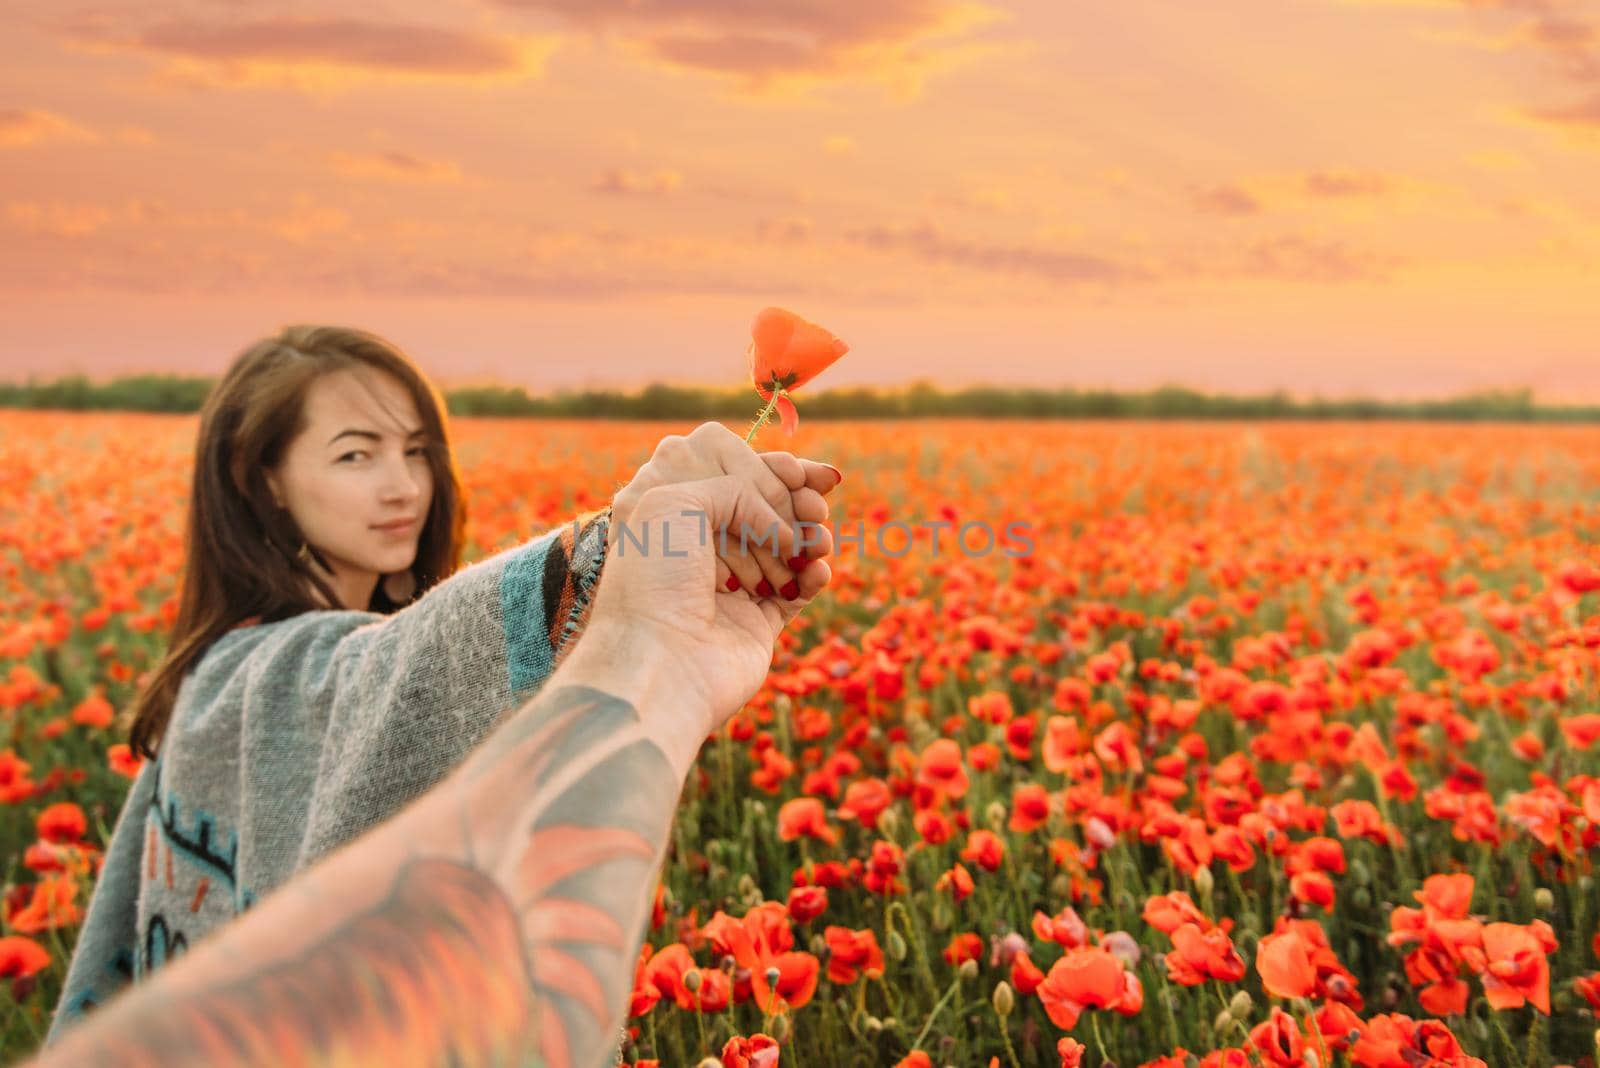 Beautiful young woman holding man's hand with red poppy and leading him in summer meadow, point of view shot. Focus on hand.